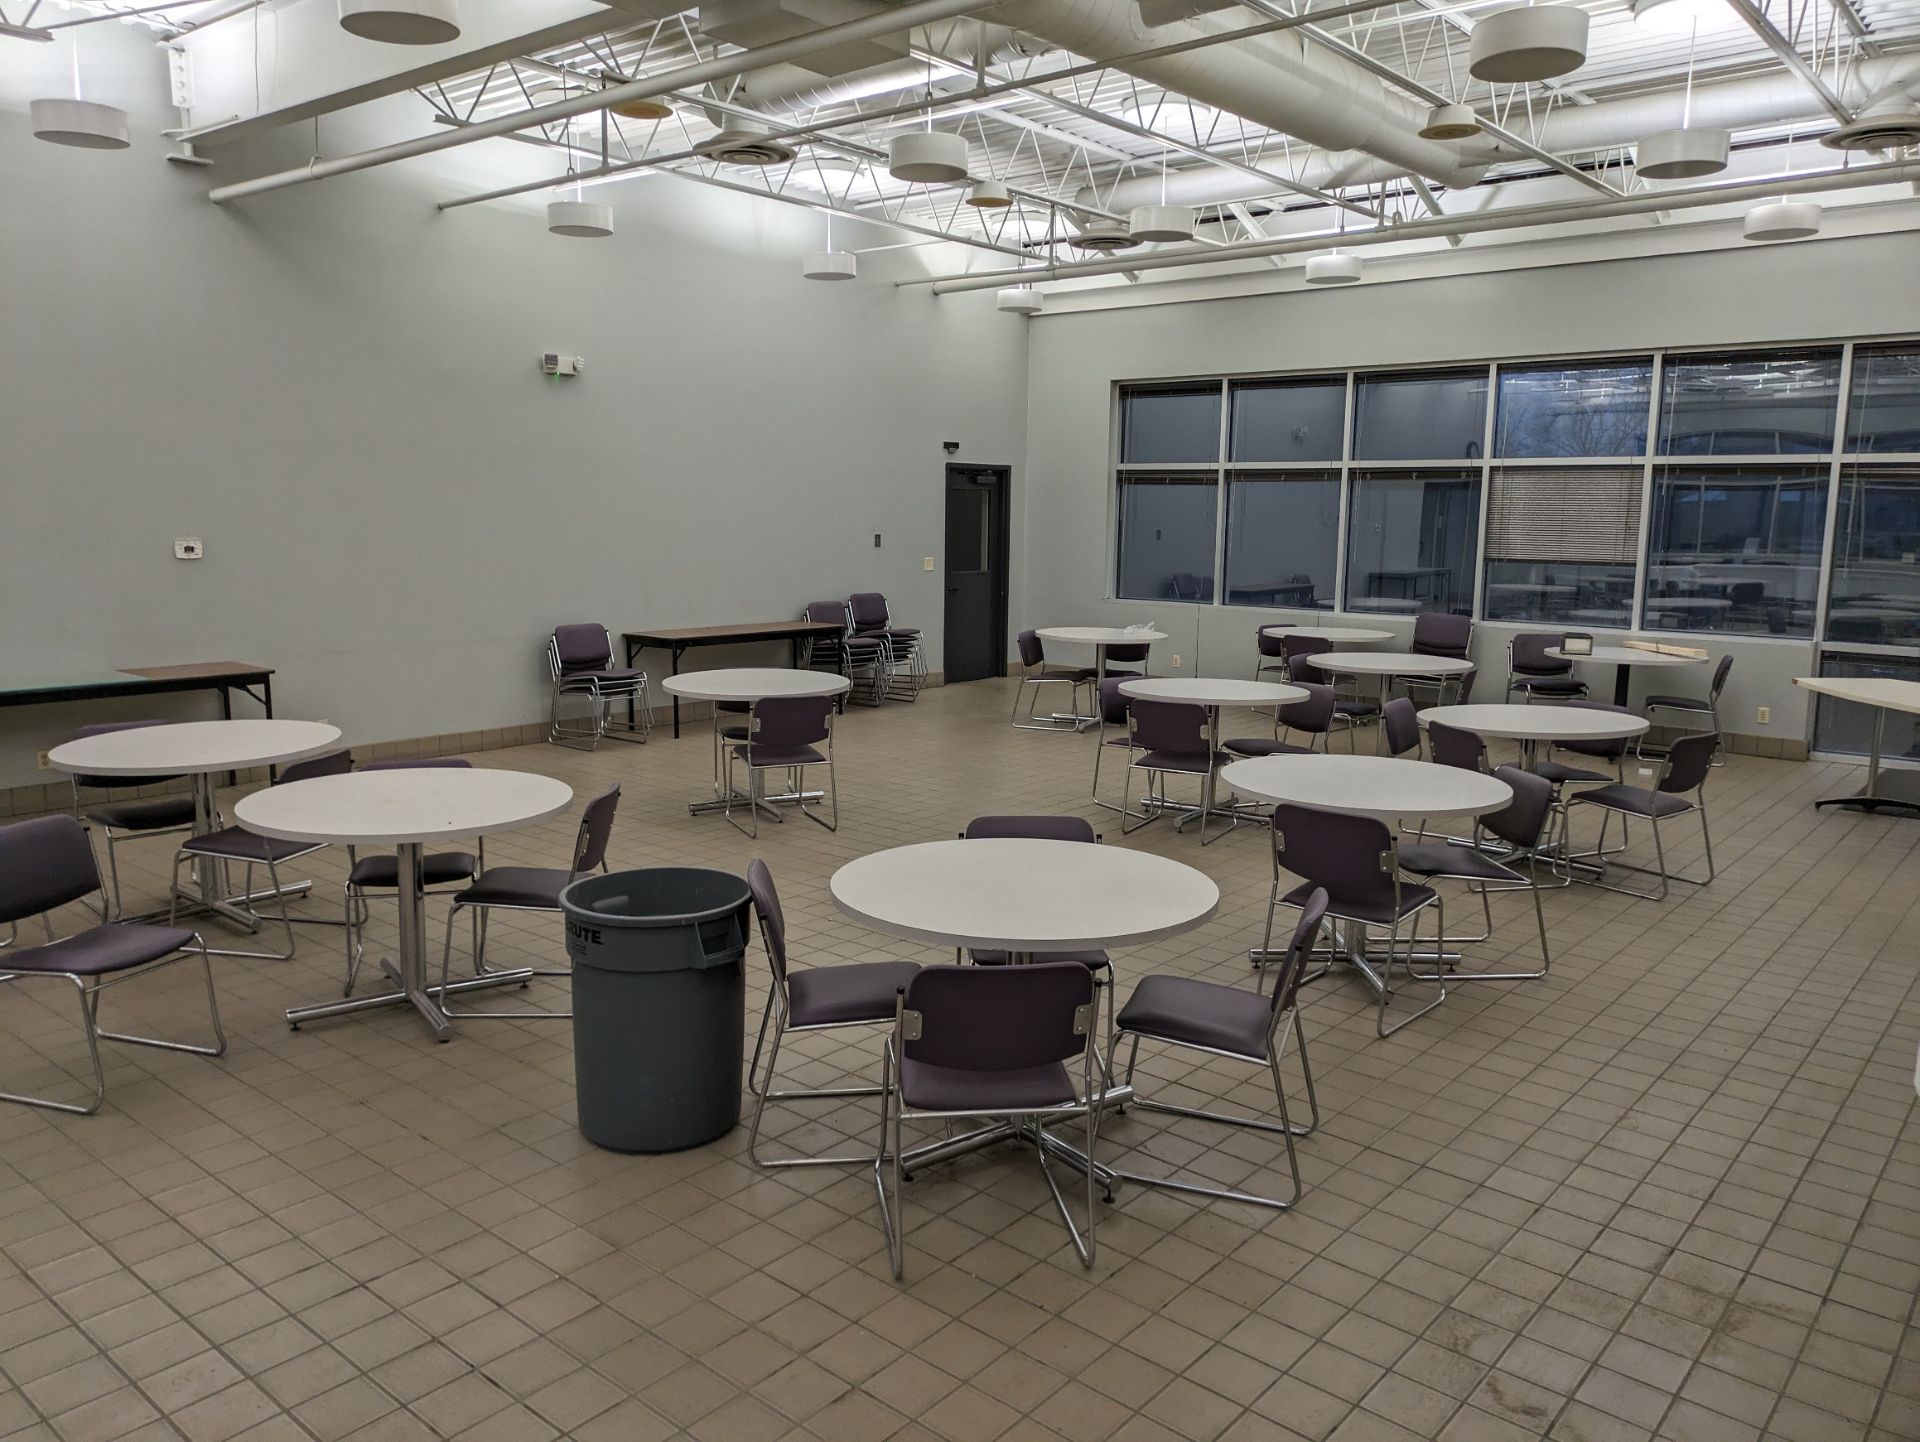 Lot of Cafeteria Furniture - Image 2 of 4